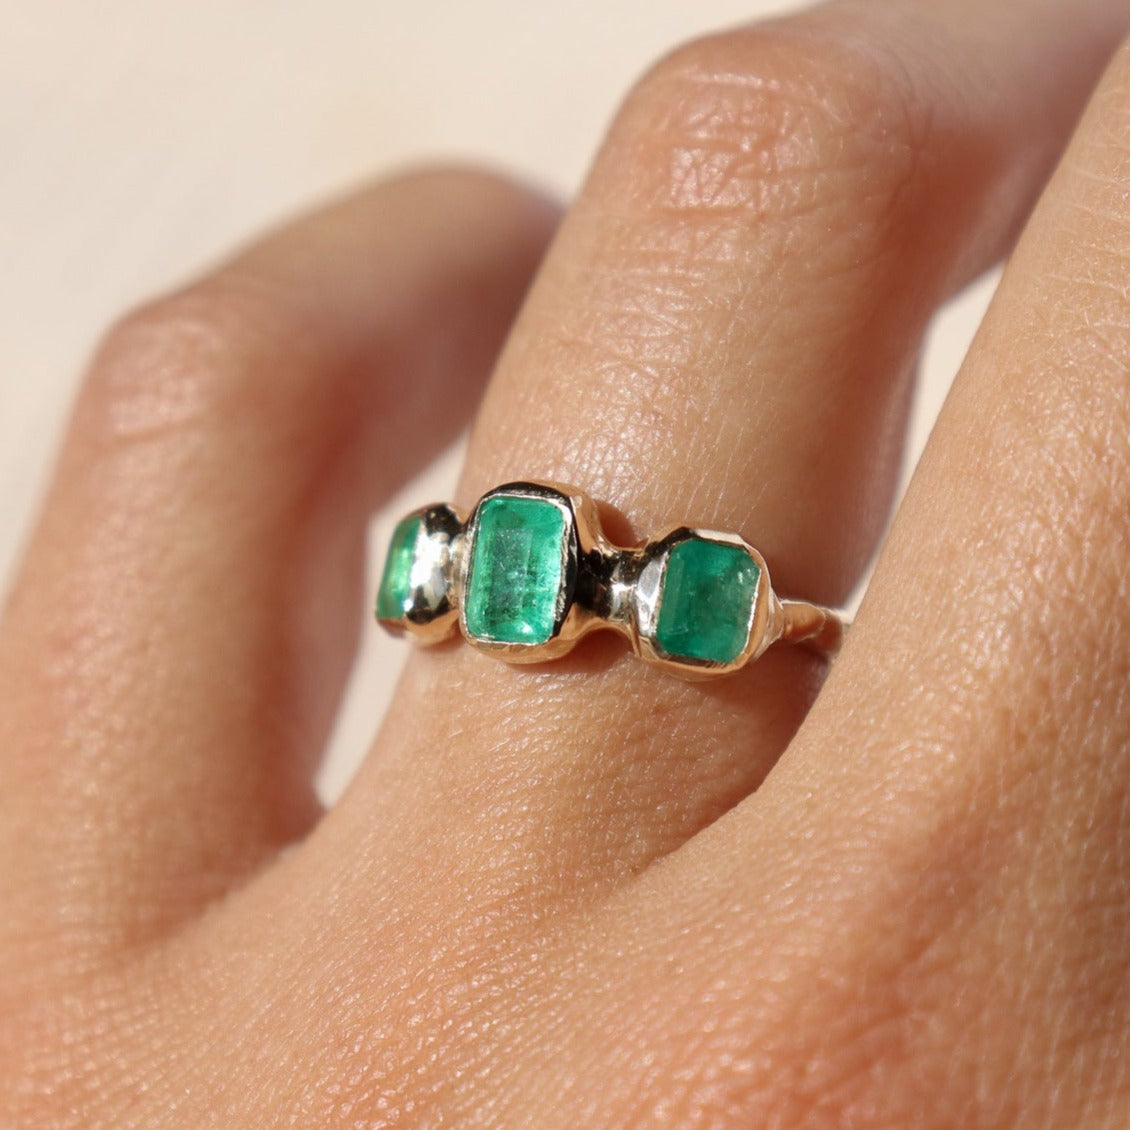 a trio emerald ring set in 14k gold worn on a ring finger